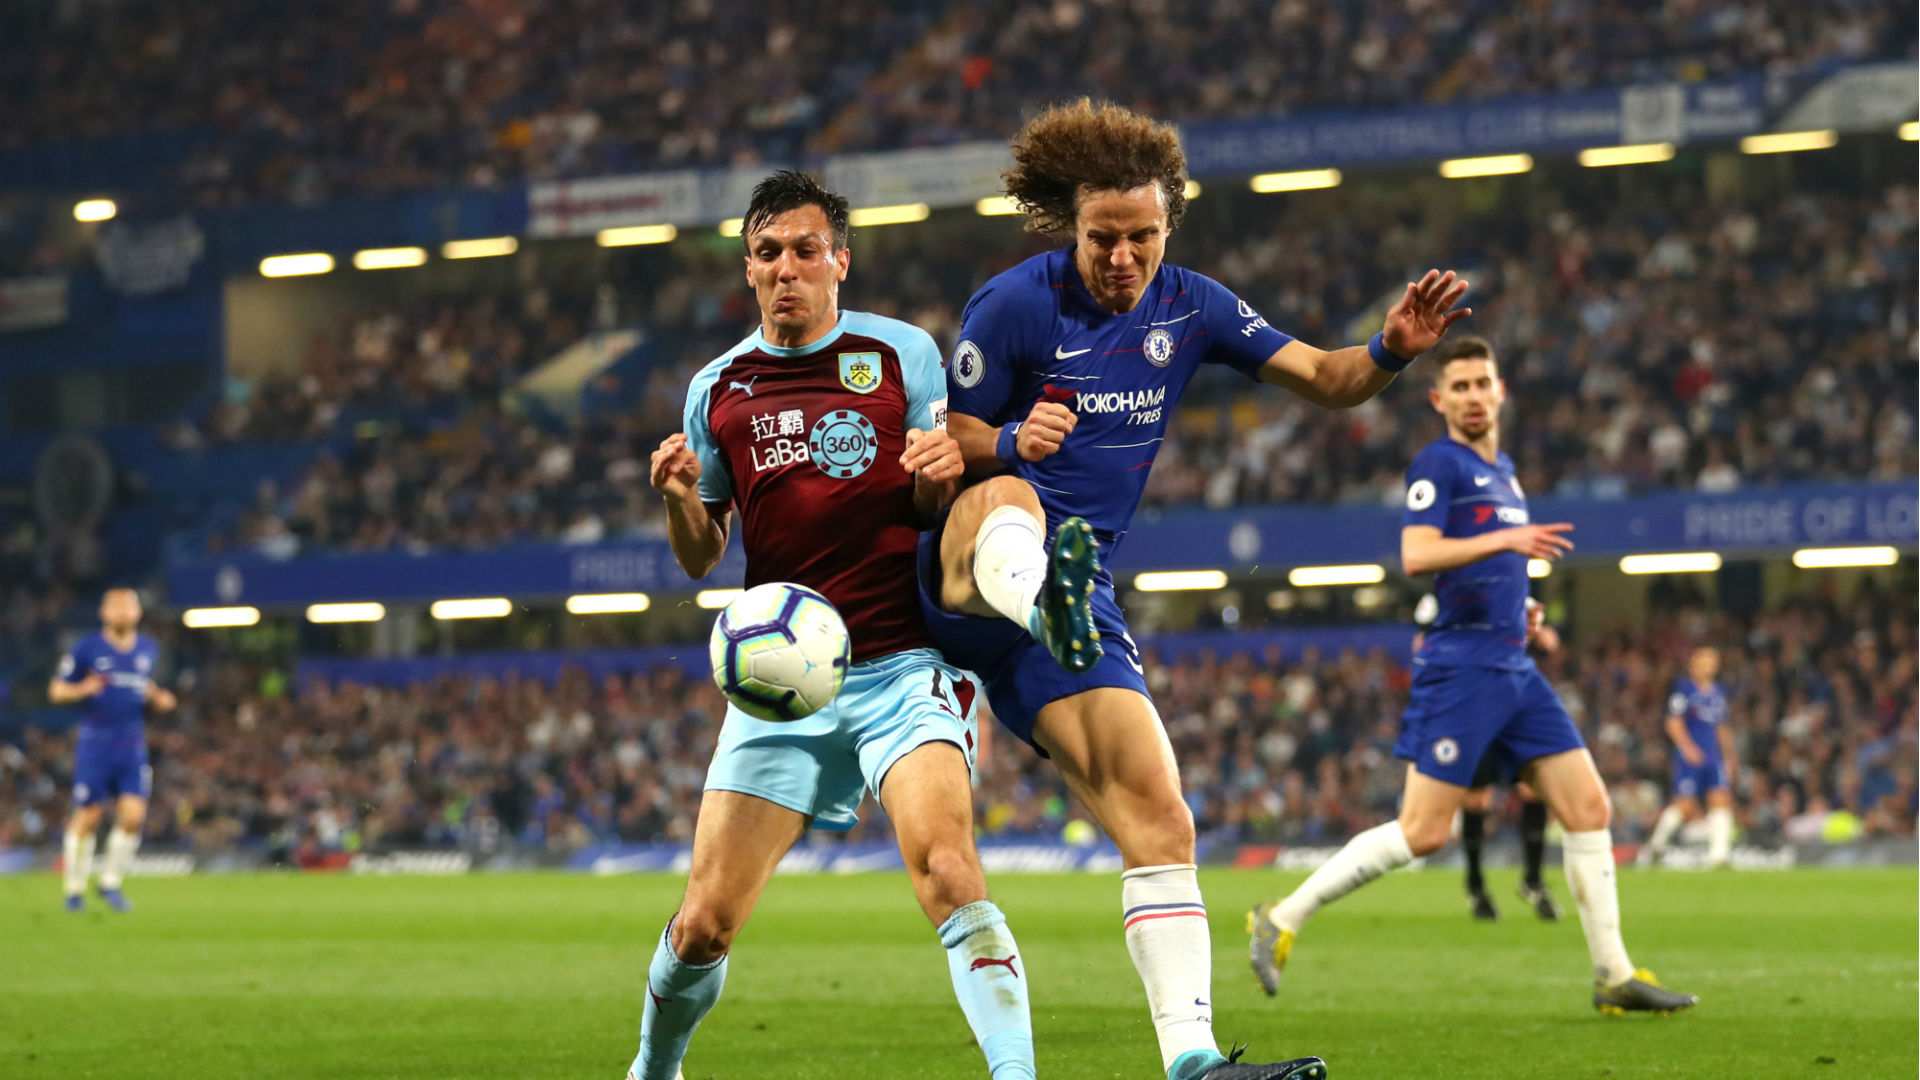 Burnley left Chelsea with a 2-2 draw on Sunday, but David Luiz was not impressed by their antics.